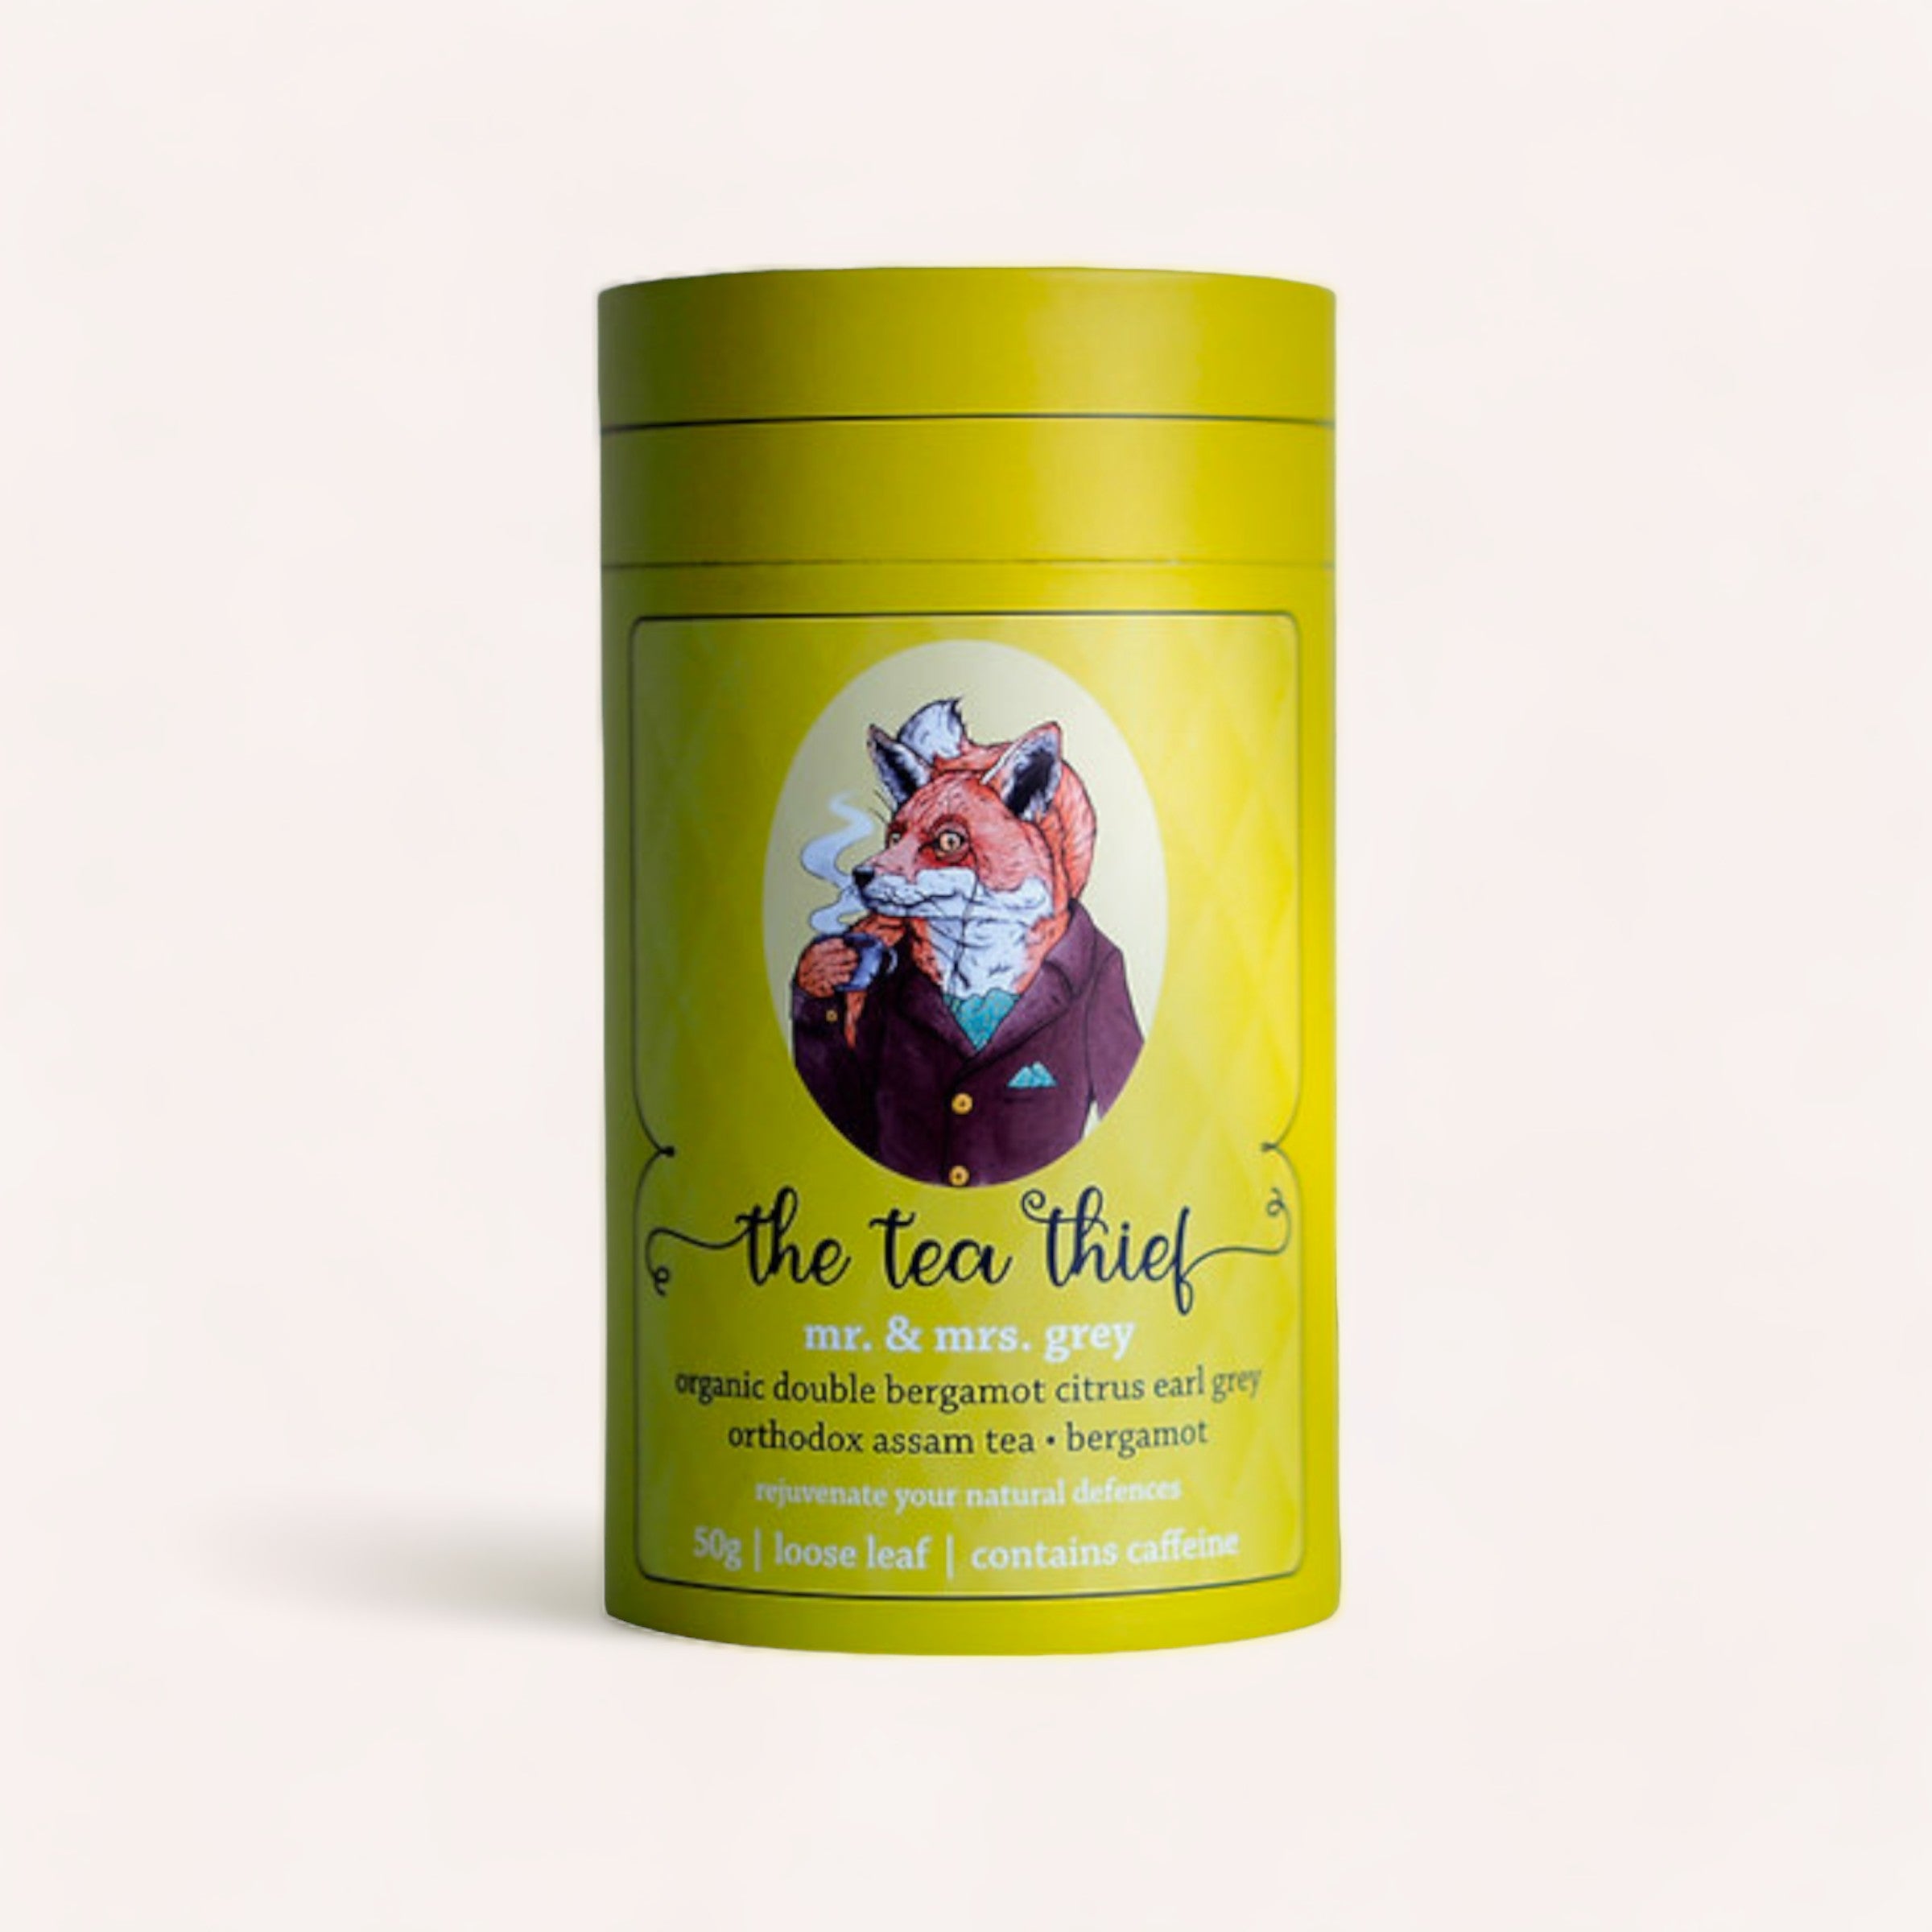 A tin of "Mr & Mrs Grey" loose leaf Earl Grey tea by The Tea Thief with a whimsical illustration of a smartly dressed fox wearing a suit, promoting organic blends rich in antioxidants and flavored with citrus bergam.